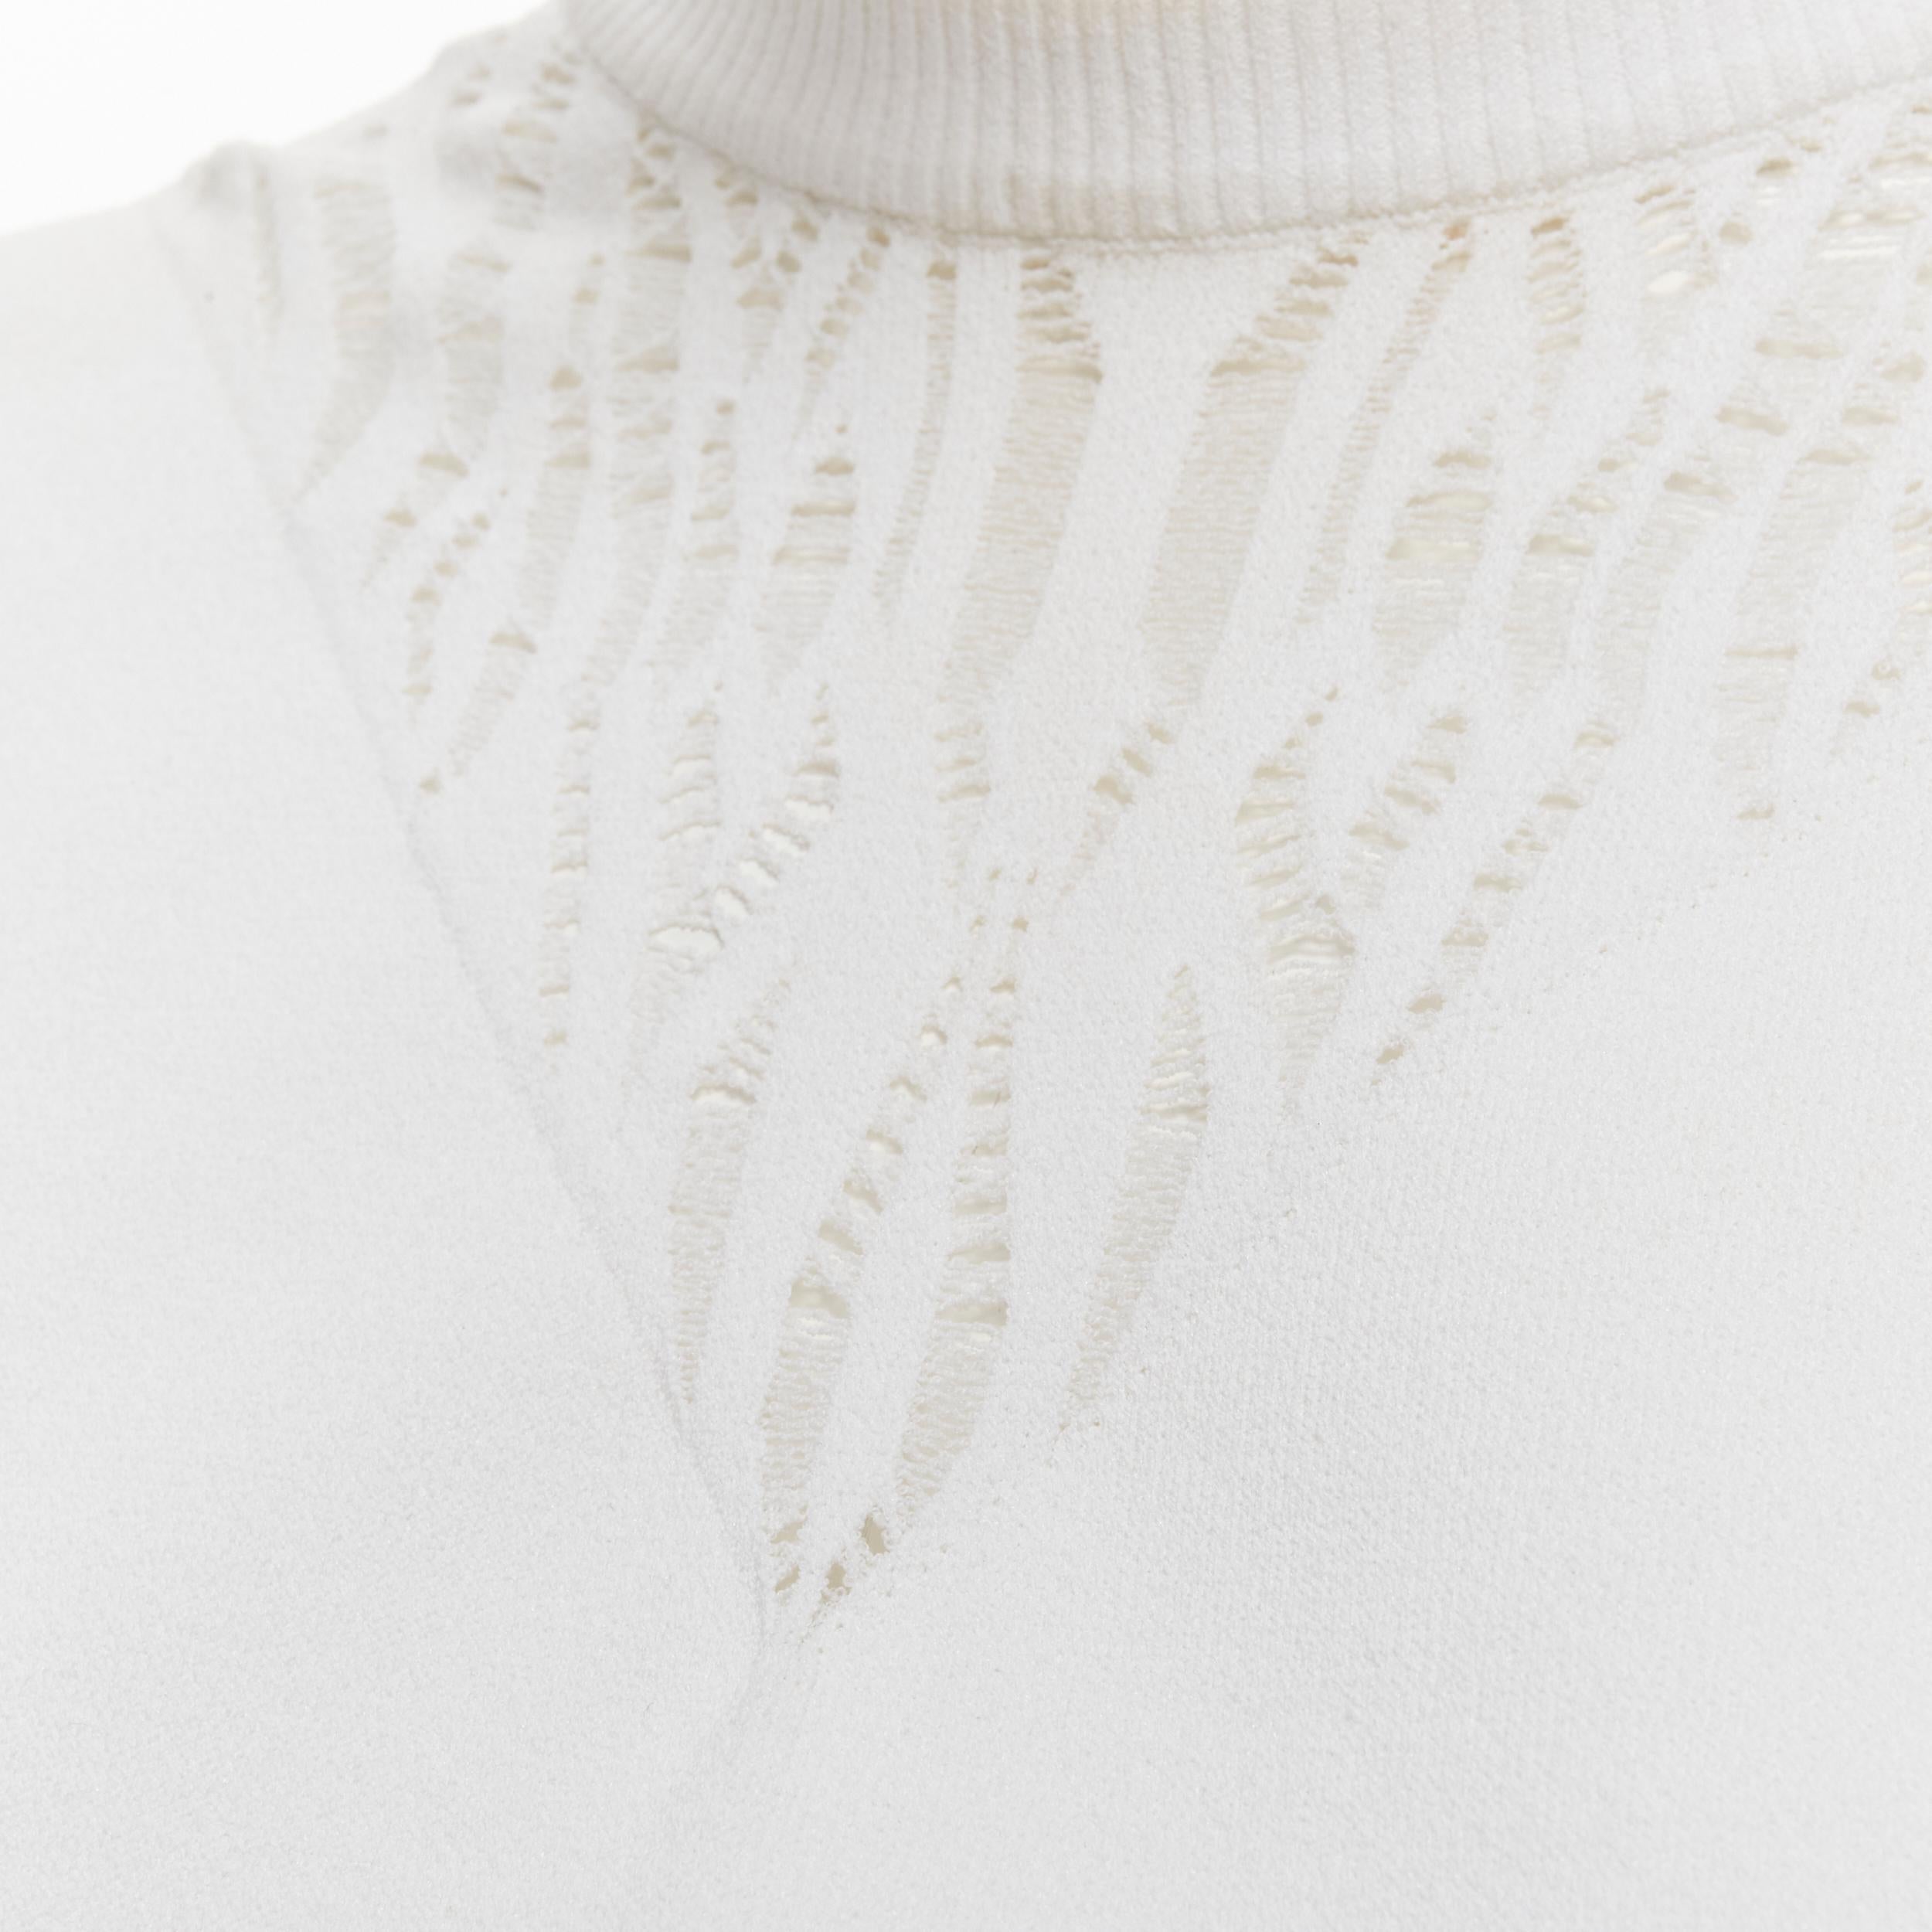 LOUIS VUITTON white viscose polyester lace knit collar sleeveless vest S 
Reference: LNKO/A01861 
Brand: Louis Vuitton 
Material: Viscose 
Color: White 
Pattern: Solid 
Extra Detail: Lace knit design at collar. 
Made in: Italy 

CONDITION: